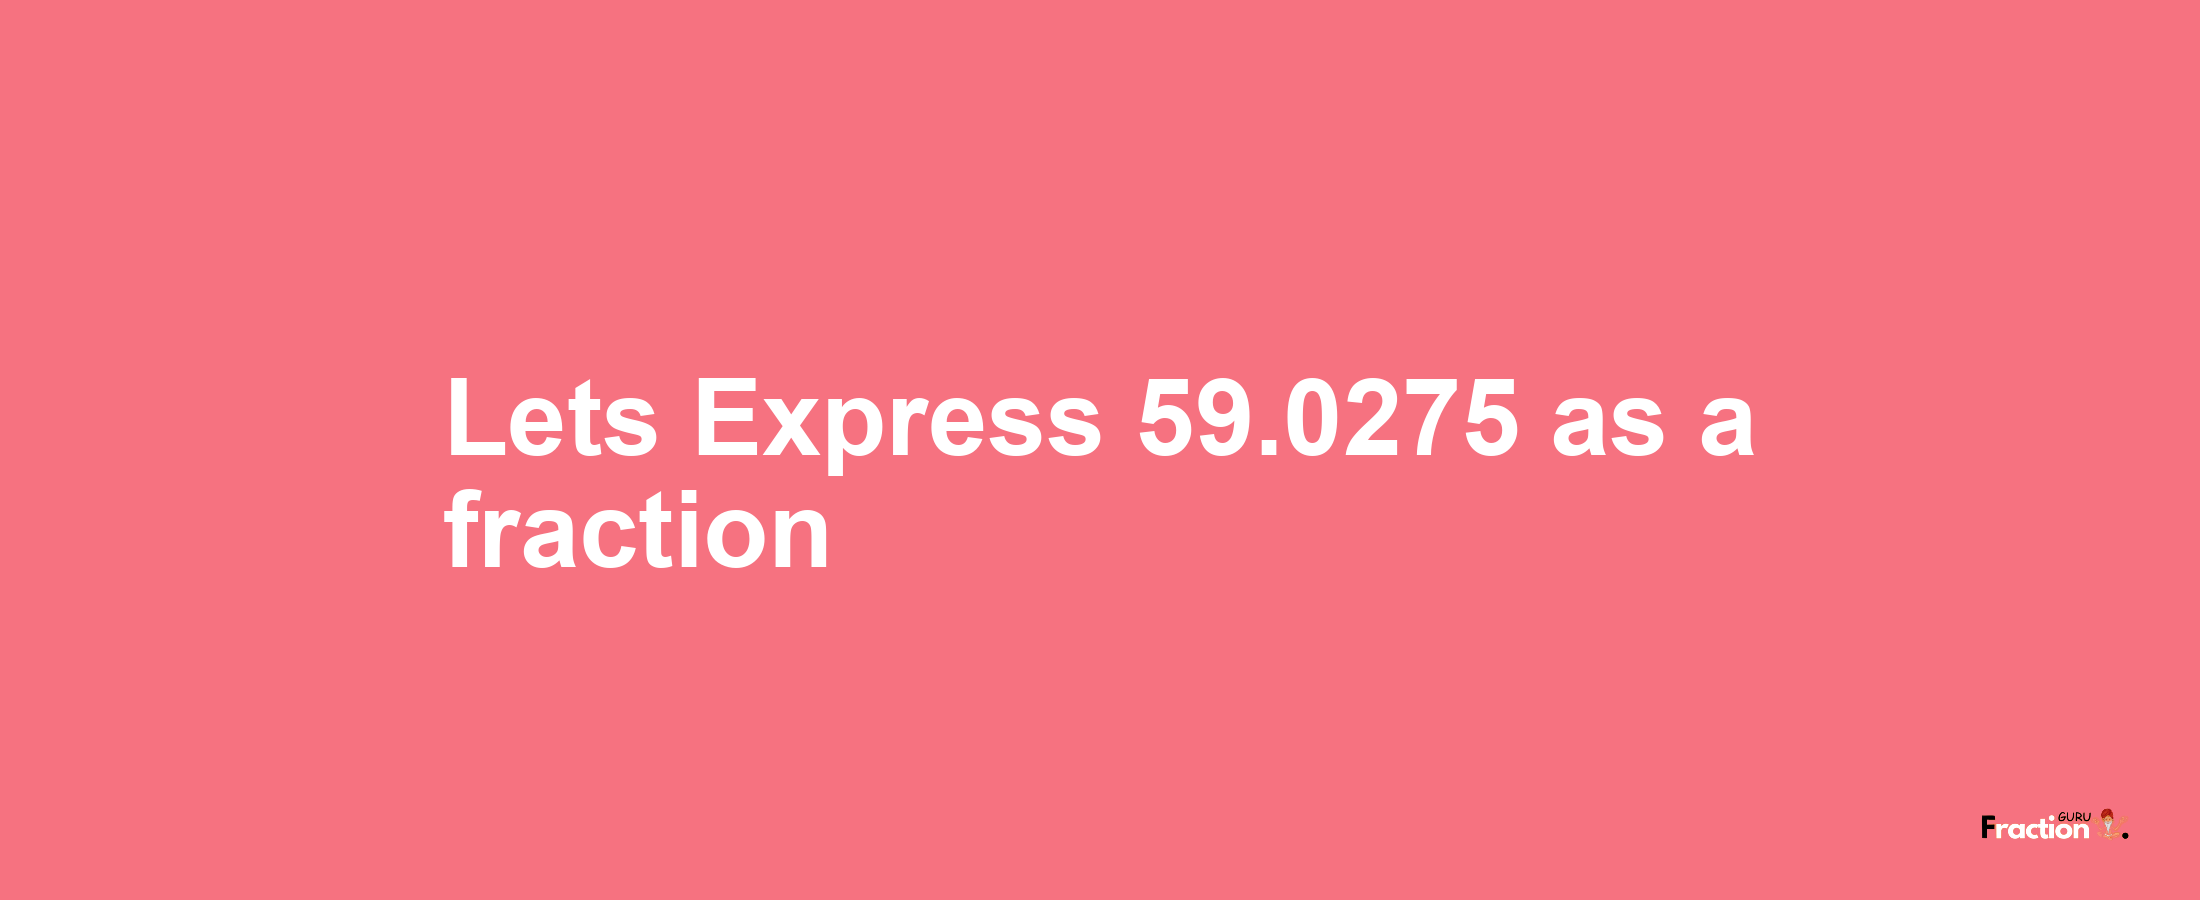 Lets Express 59.0275 as afraction